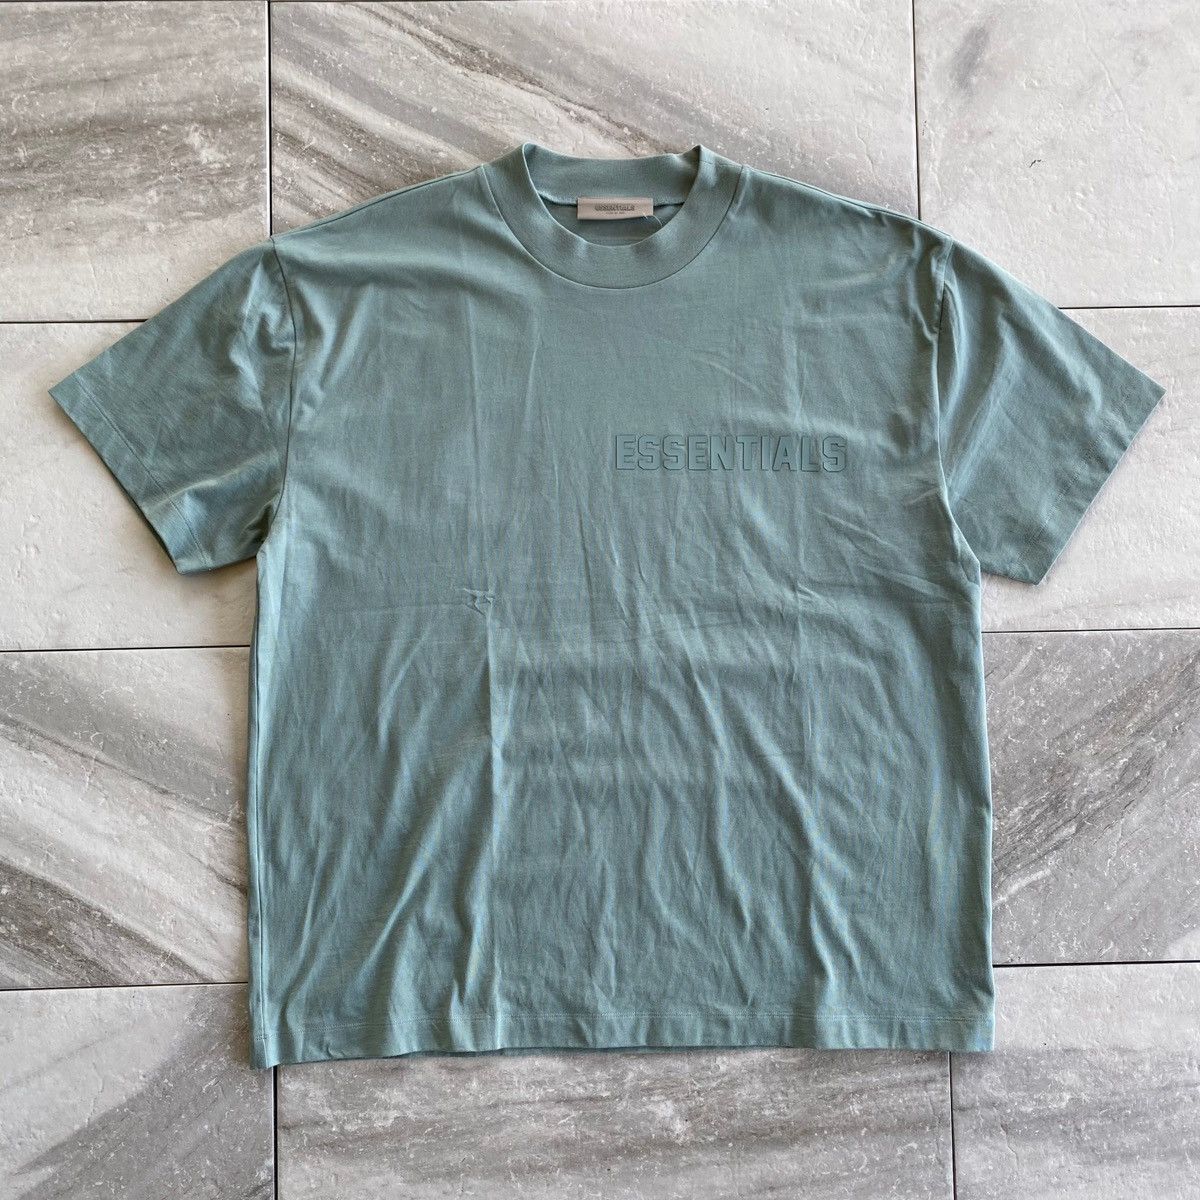 Fear of God Fear Of God Essentials Sycamore Tee | Grailed